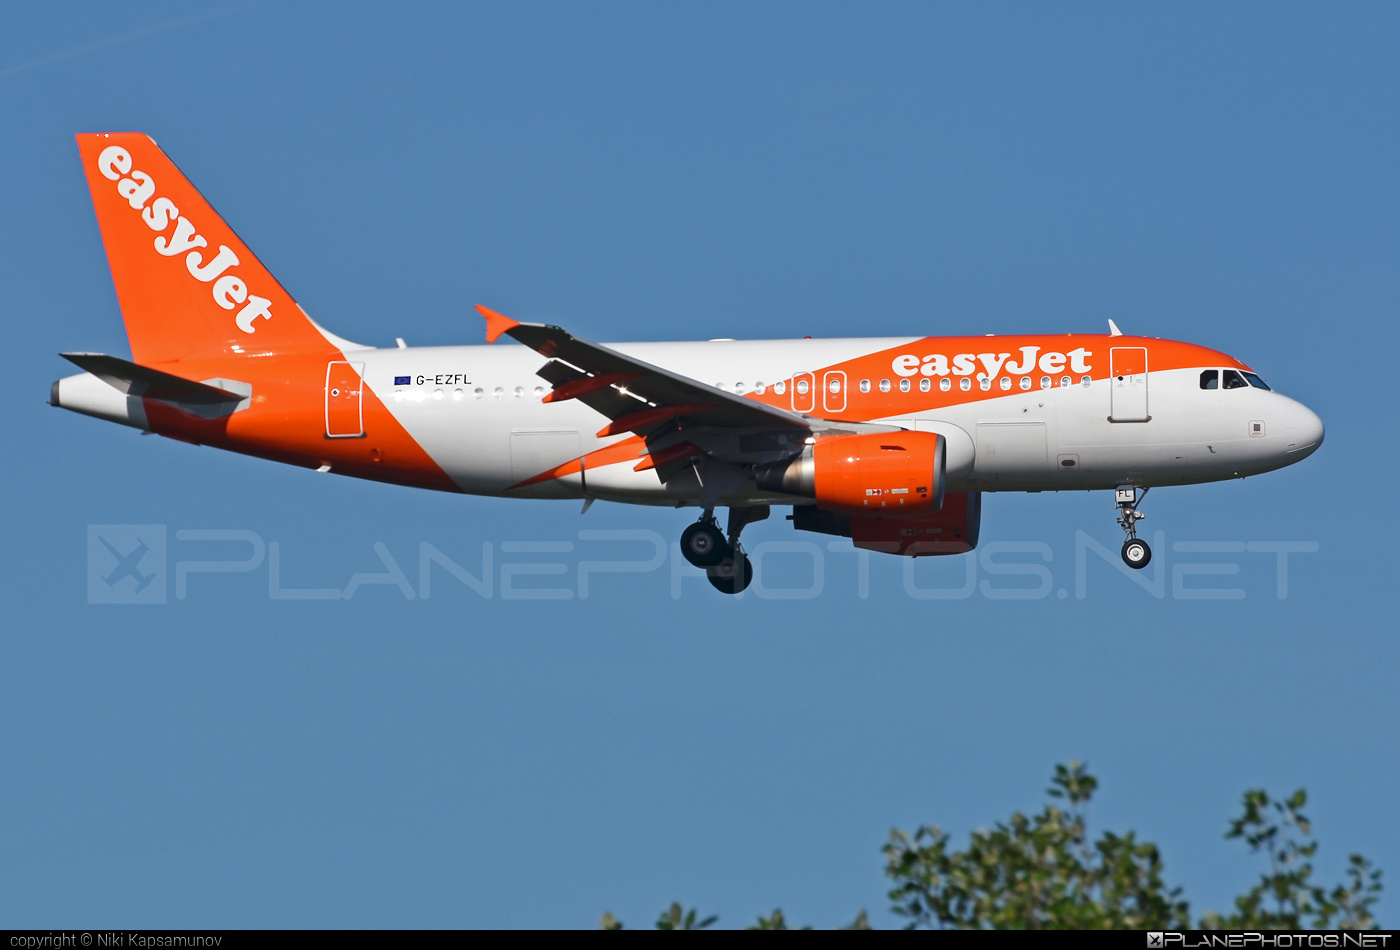 Airbus A319-111 - G-EZFL operated by easyJet #a319 #a320family #airbus #airbus319 #easyjet